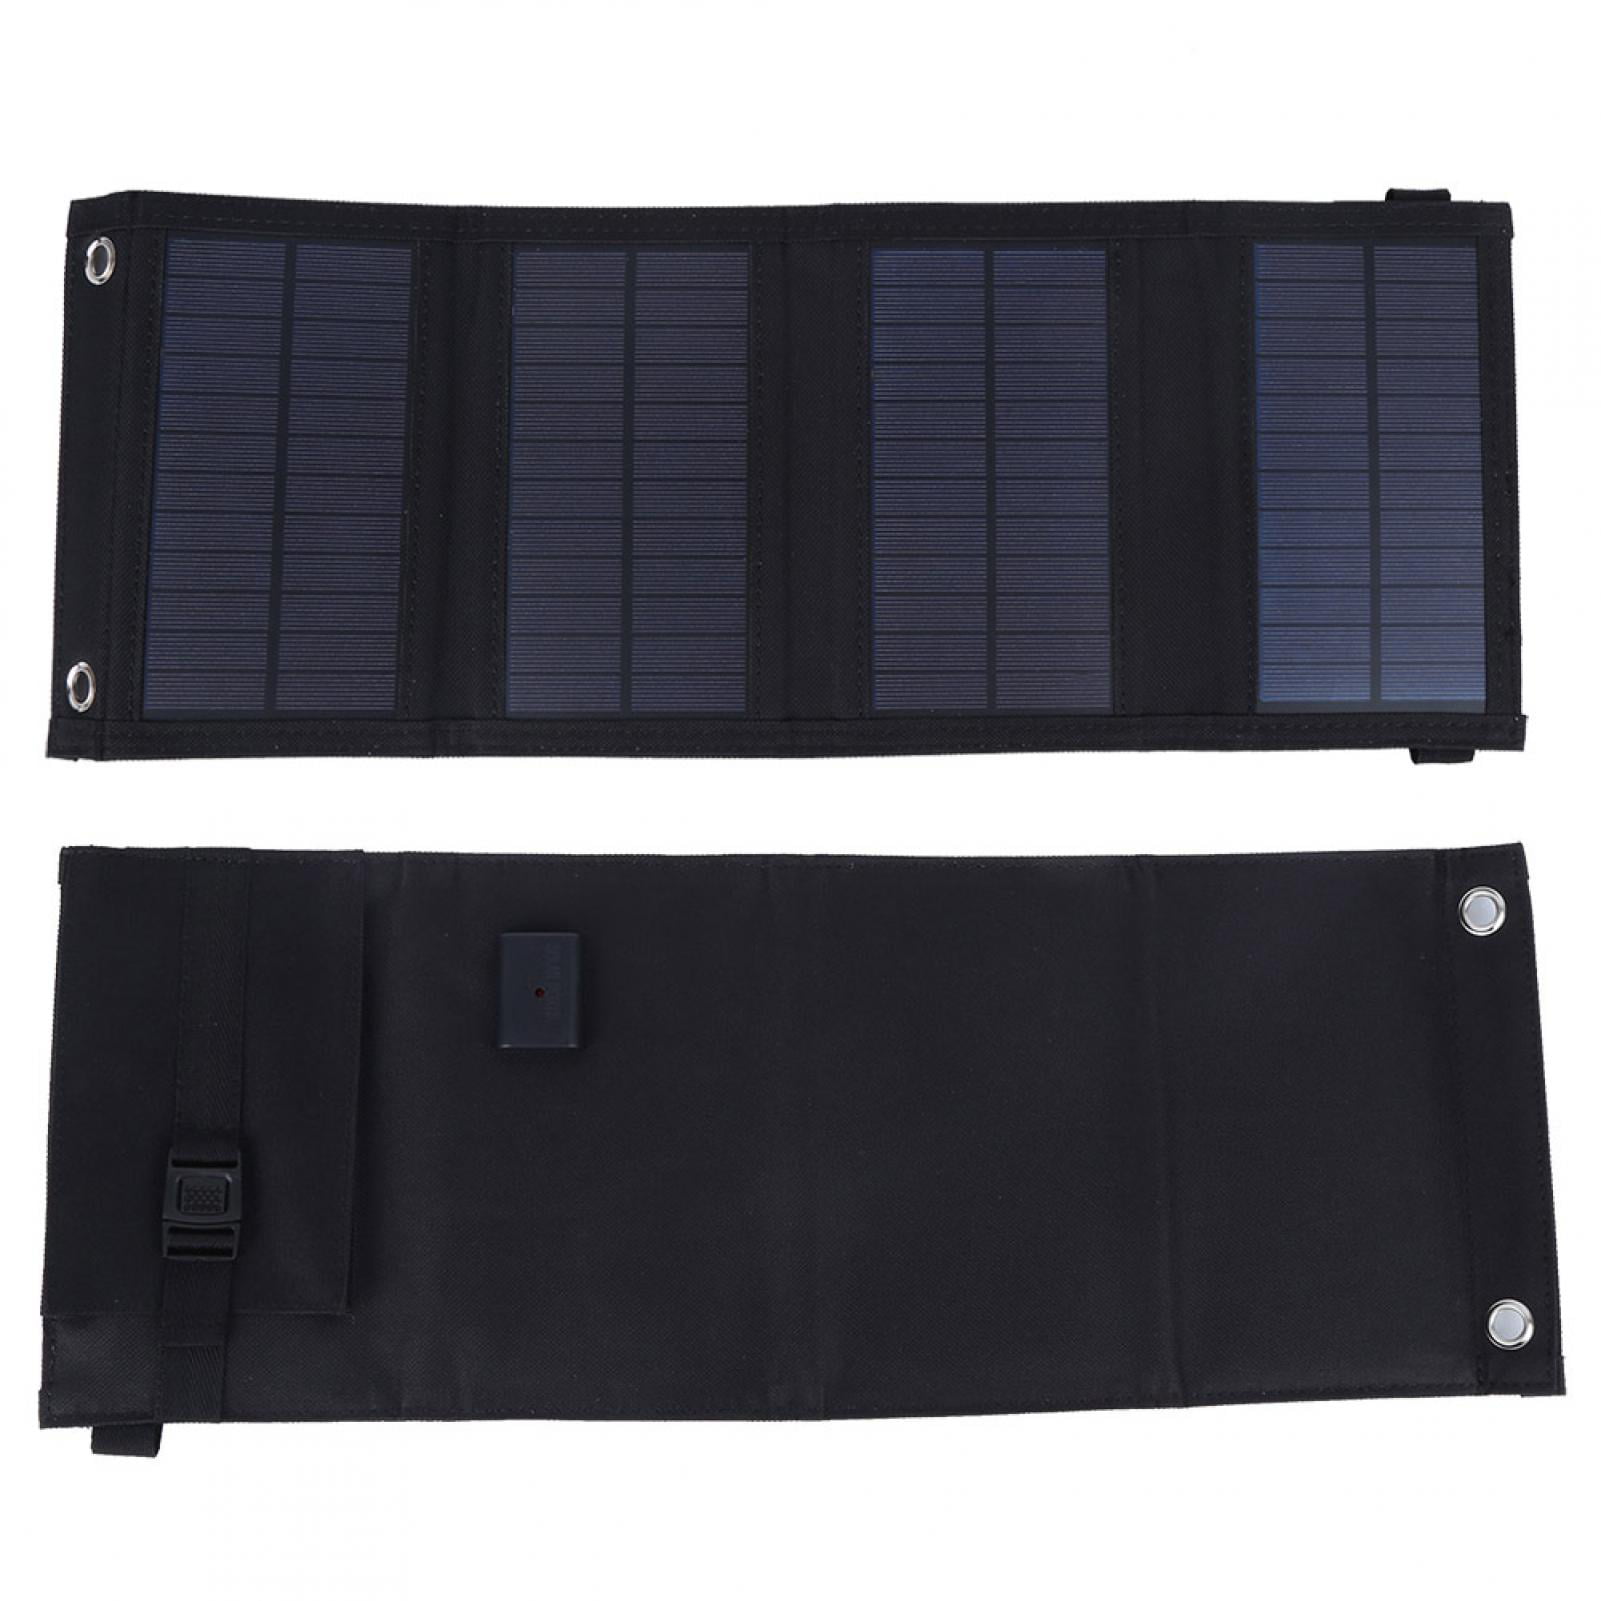 Travel Camping 10W 5.5V Lightweight Portable Folding Charger Board Waterproof Emergency Solar Charger Mobile Power Supply for Mobile Phones with Carabiners Outdoor Black Solar Panel Charger 